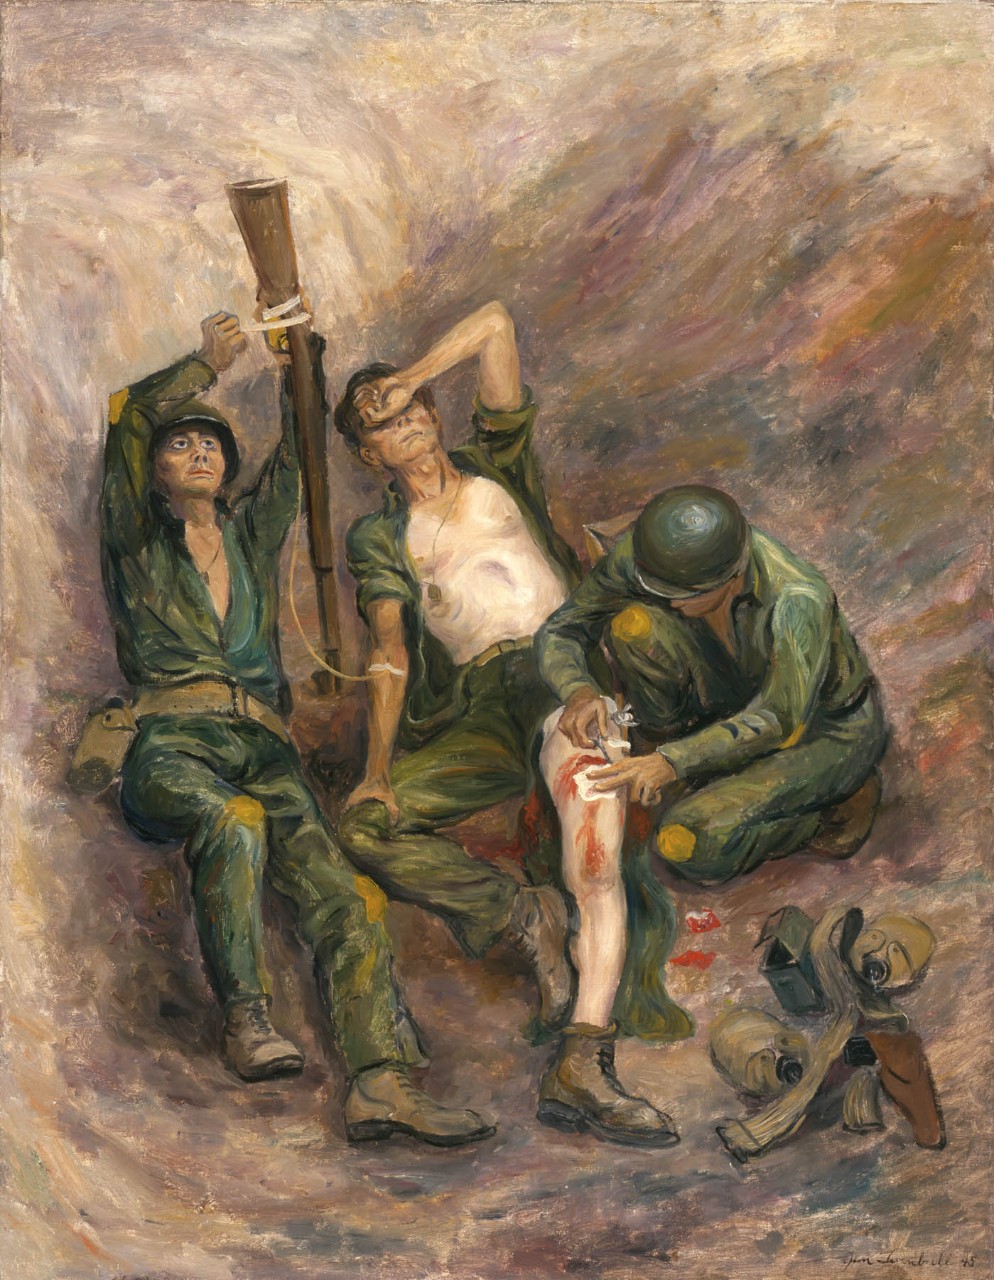 Two medics treat a wounded man